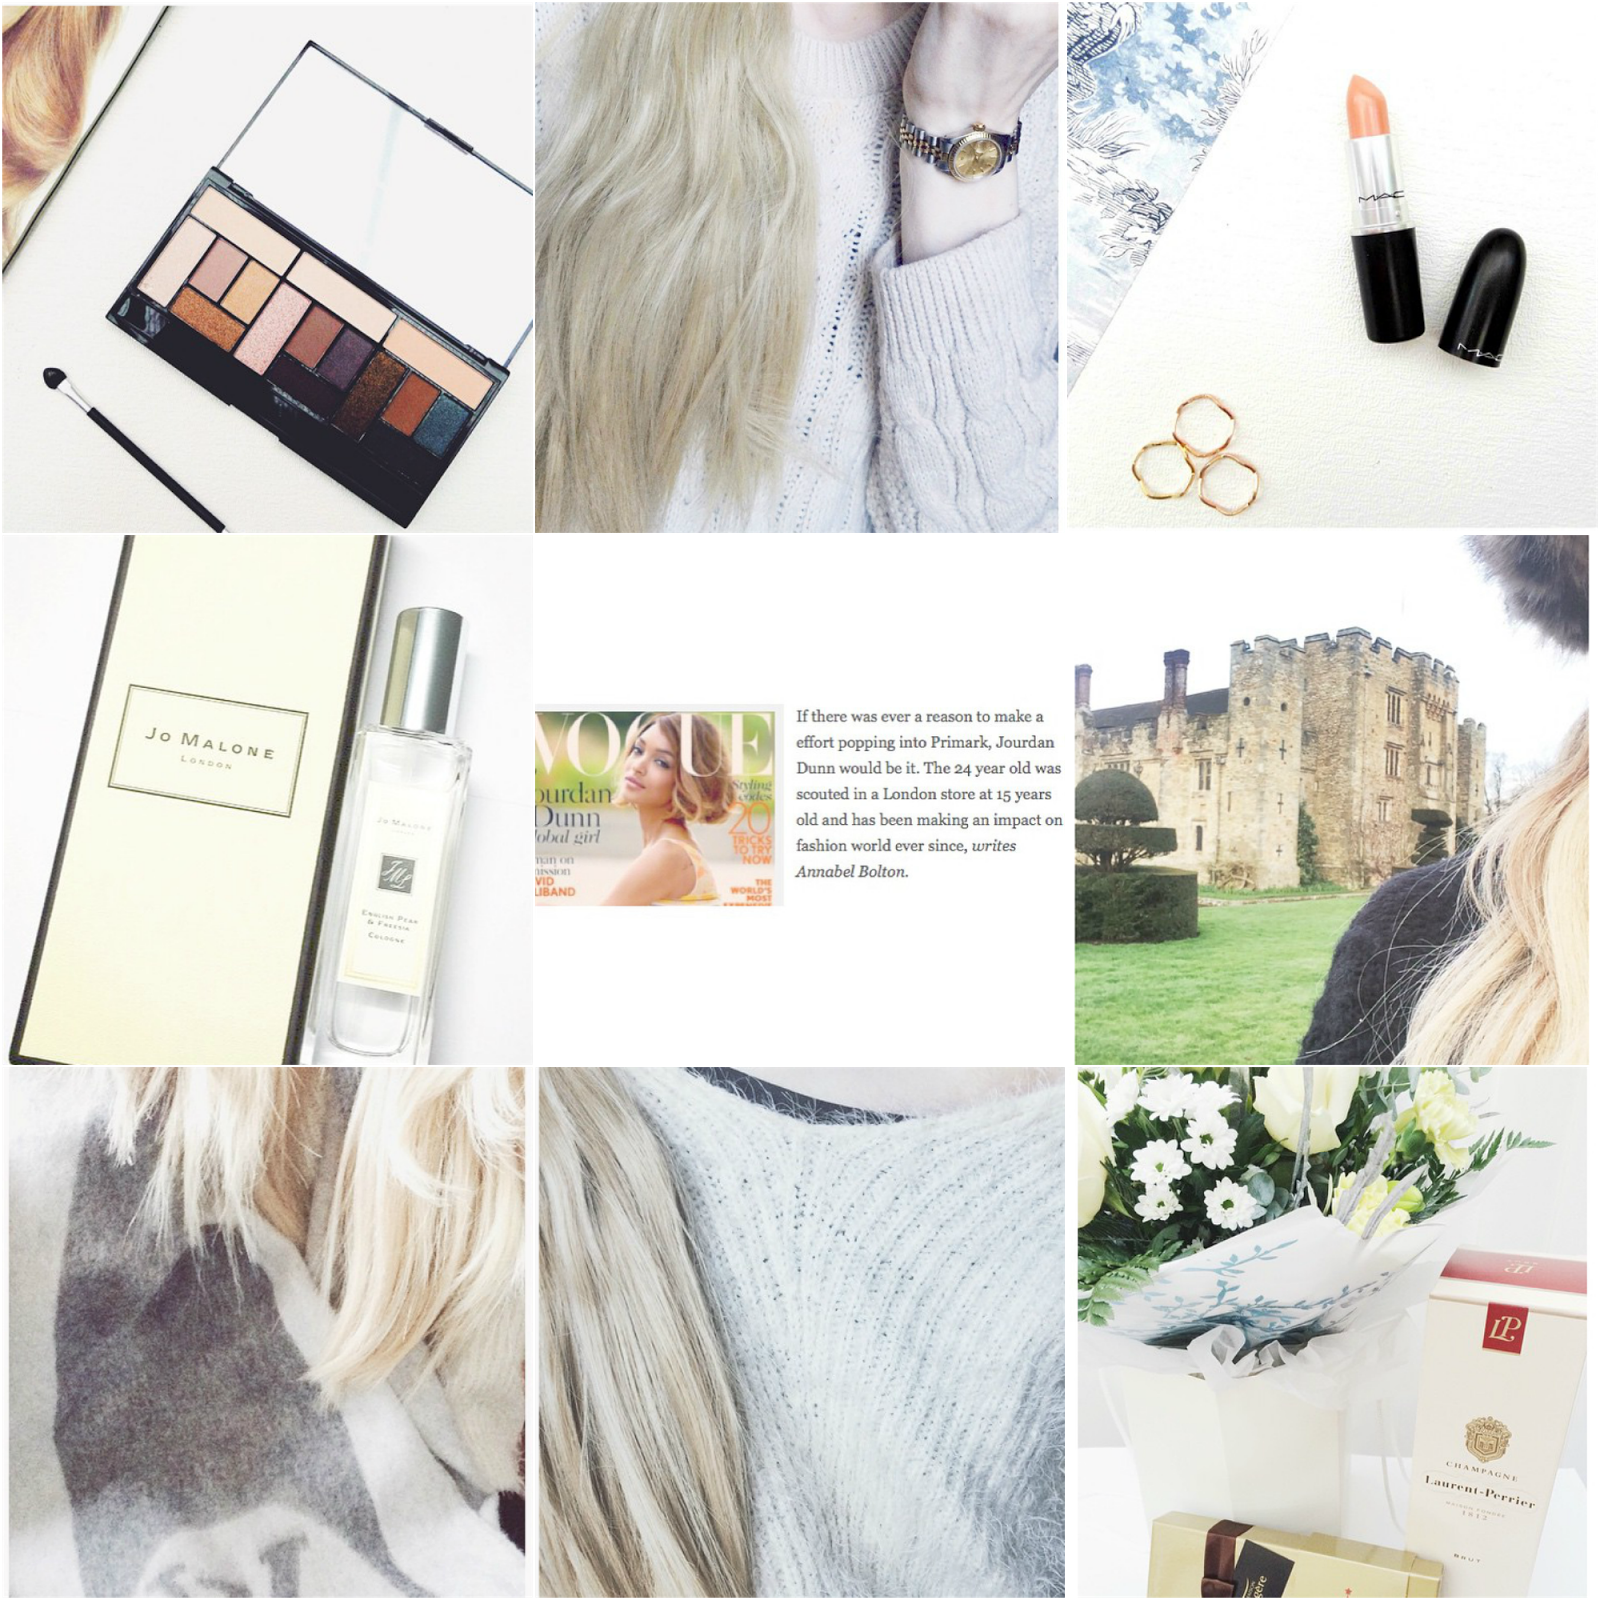 Instagram Diary: Part Four, Instagram Diary, Makeup Revolution Palette, Hever Castle, Playing Tourist, Mascara and Maltesers Instagram, Louis Vutton, Jo Malone,